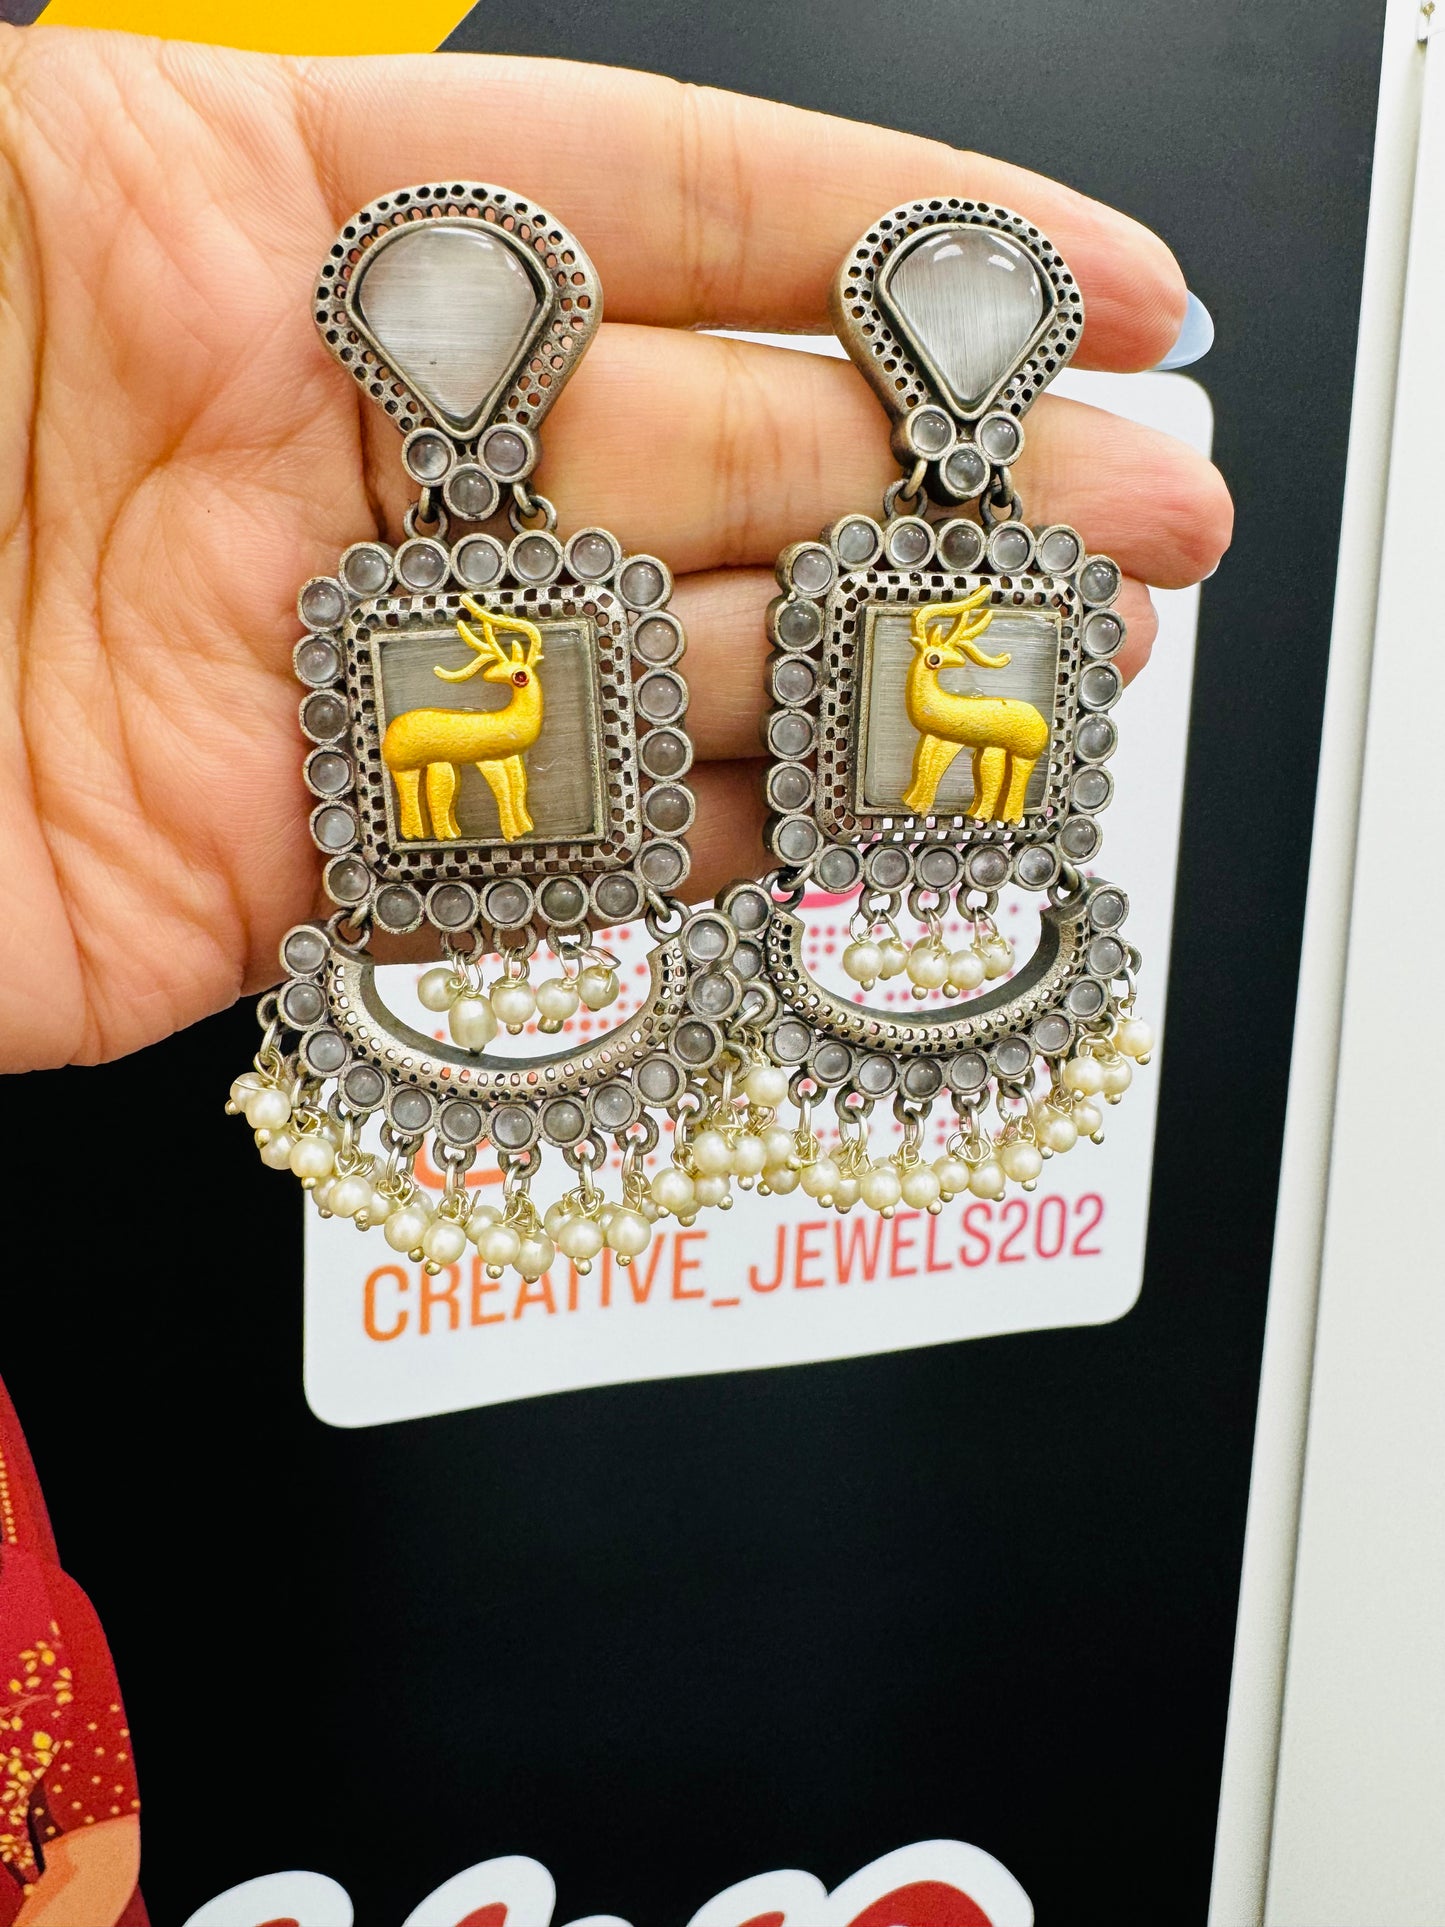 Creative Jewels Oxidized Deer Earrings: Unique and Stylish